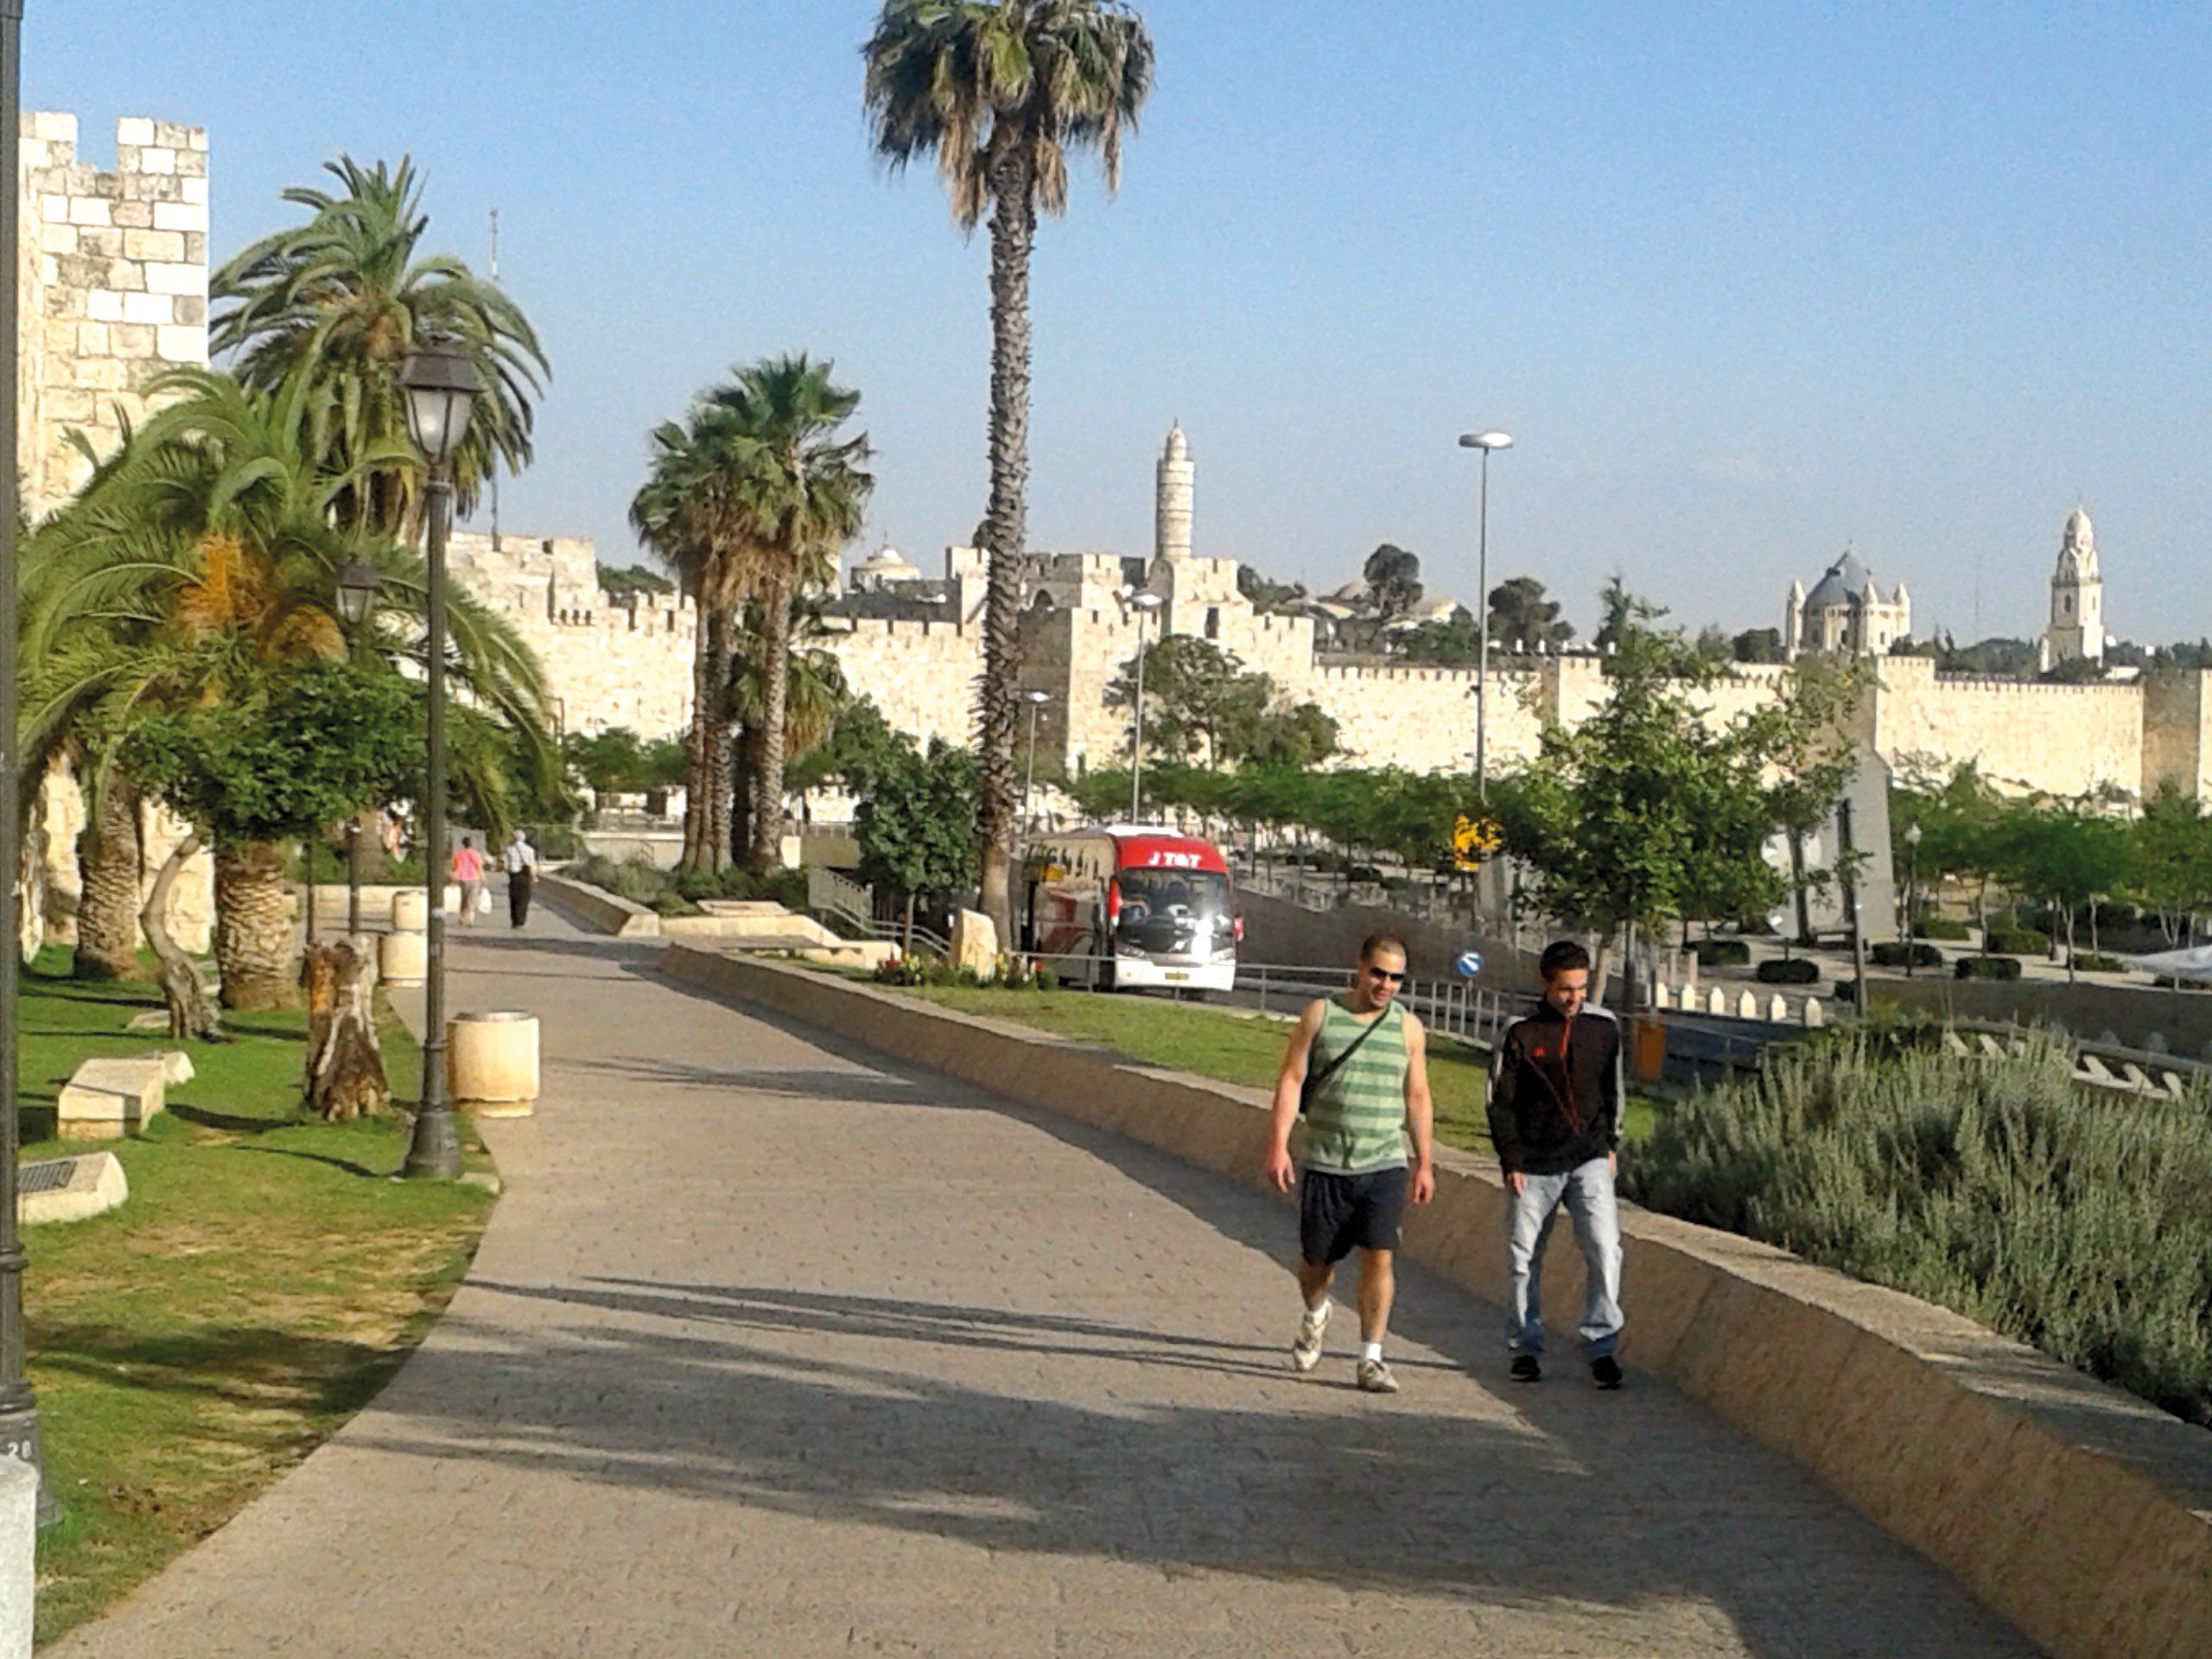 No dividing walls: the magnificent walls of Jerusalem’s Old City looking towards Jaffa Gate, close to the conference venue. But there is peace within as Arab and Jew embrace each other.